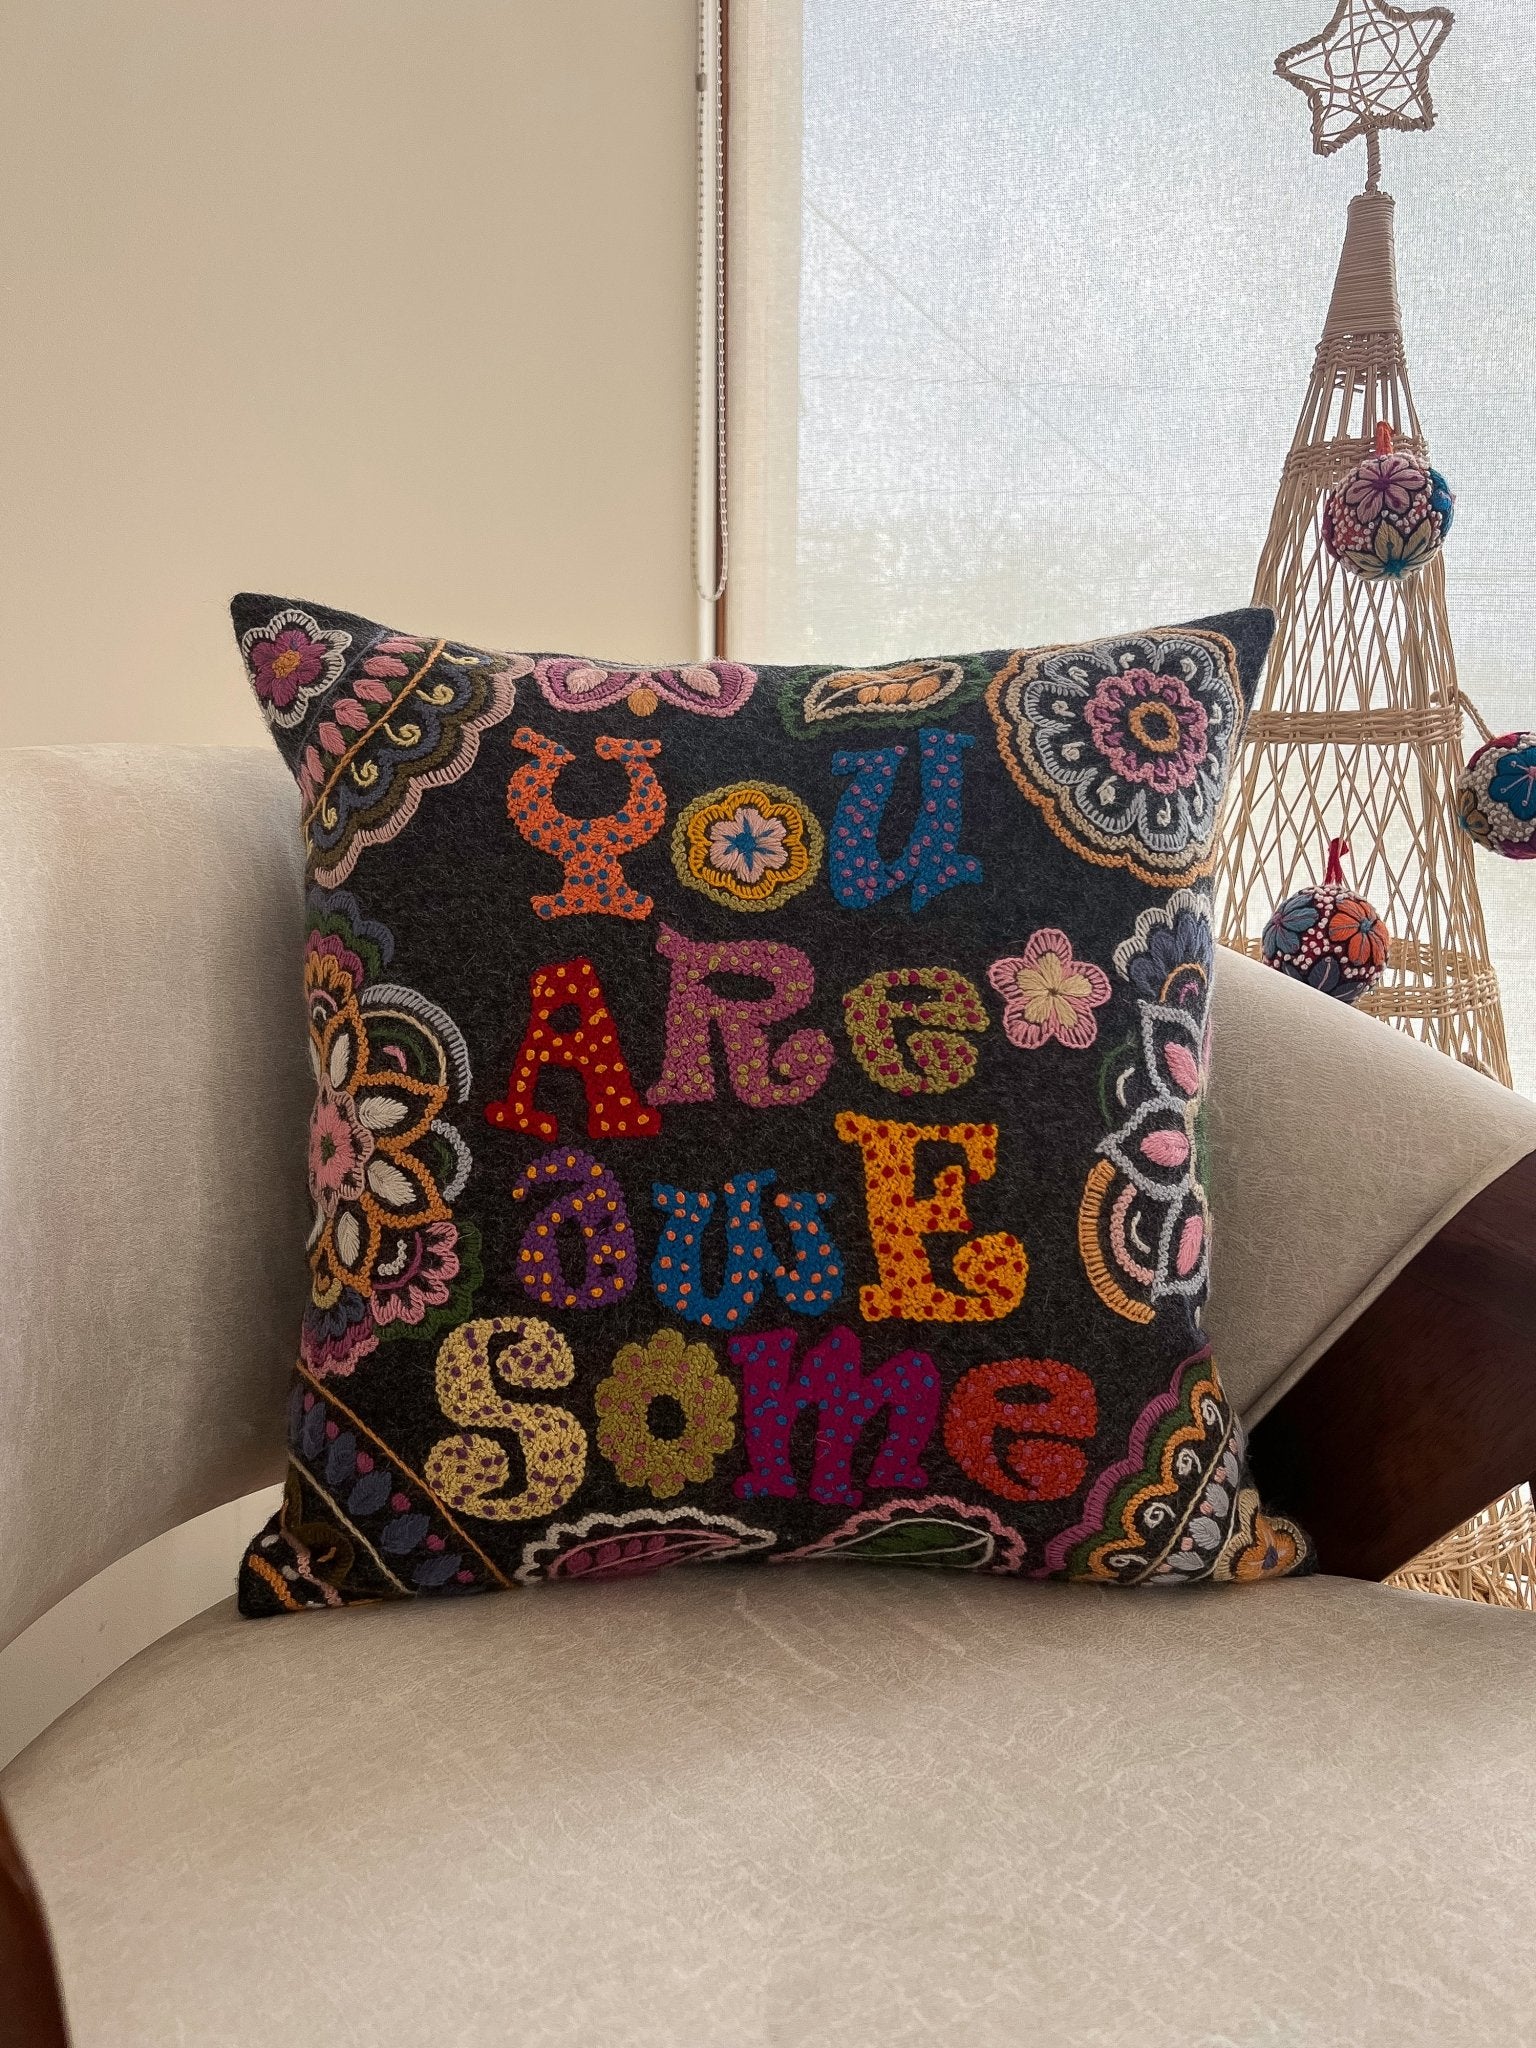 MHR "You are Awesome" Pillow-Black - Alpacas at Marquam Hill Ranch